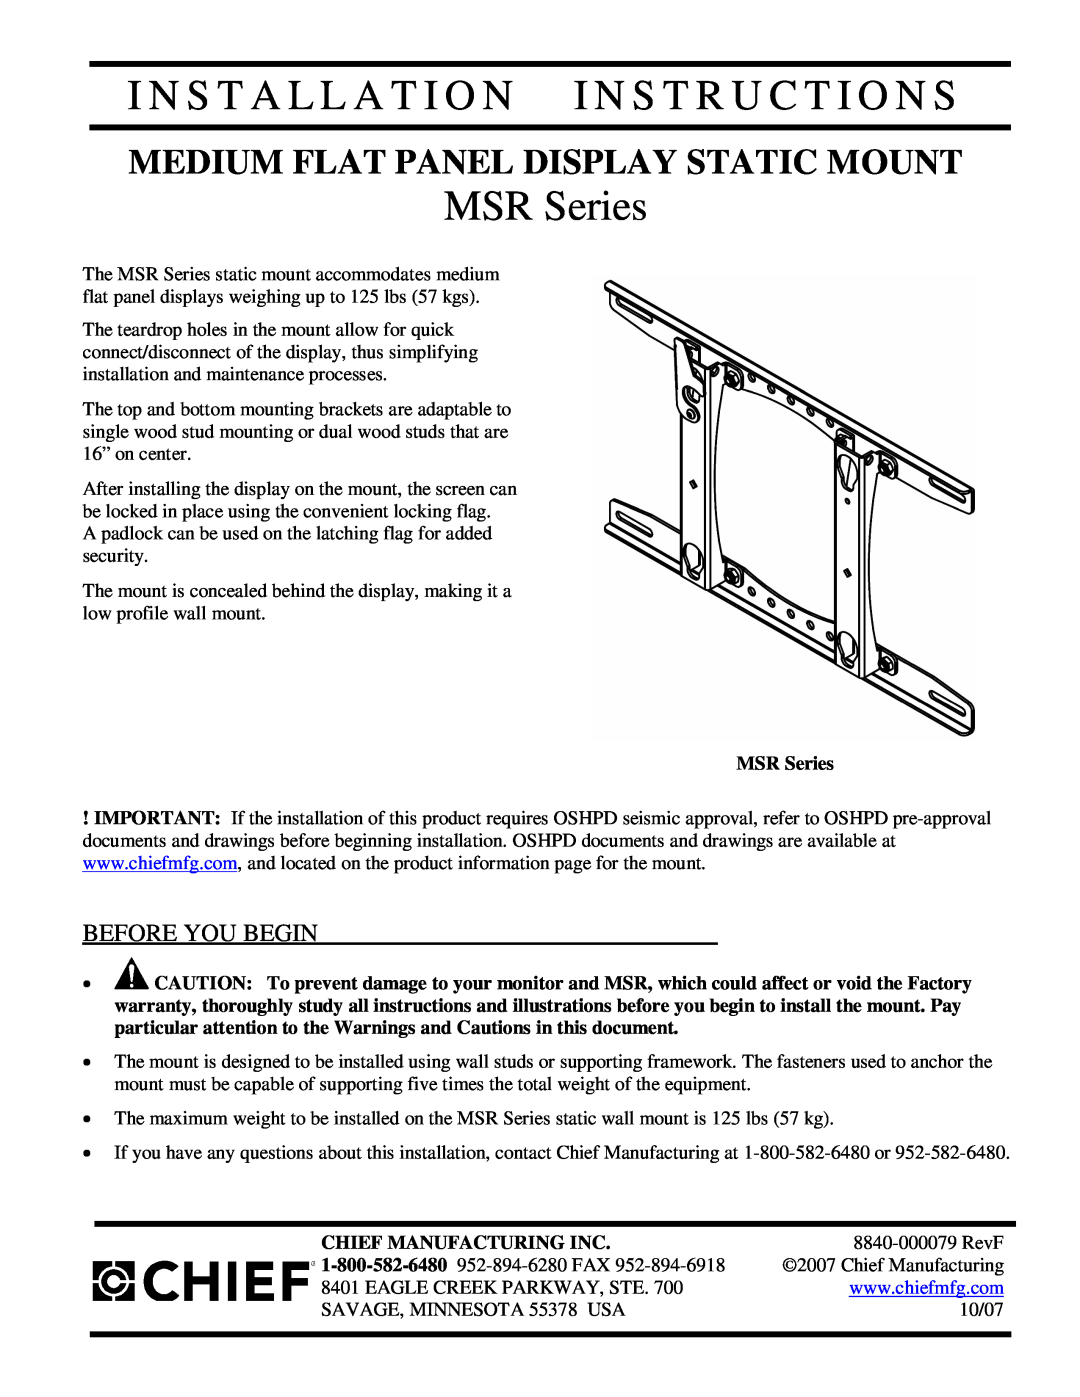 Chief Manufacturing MSR Series installation instructions I N S T A L L A T I O N I N S T R U C T I O N S, Before You Begin 